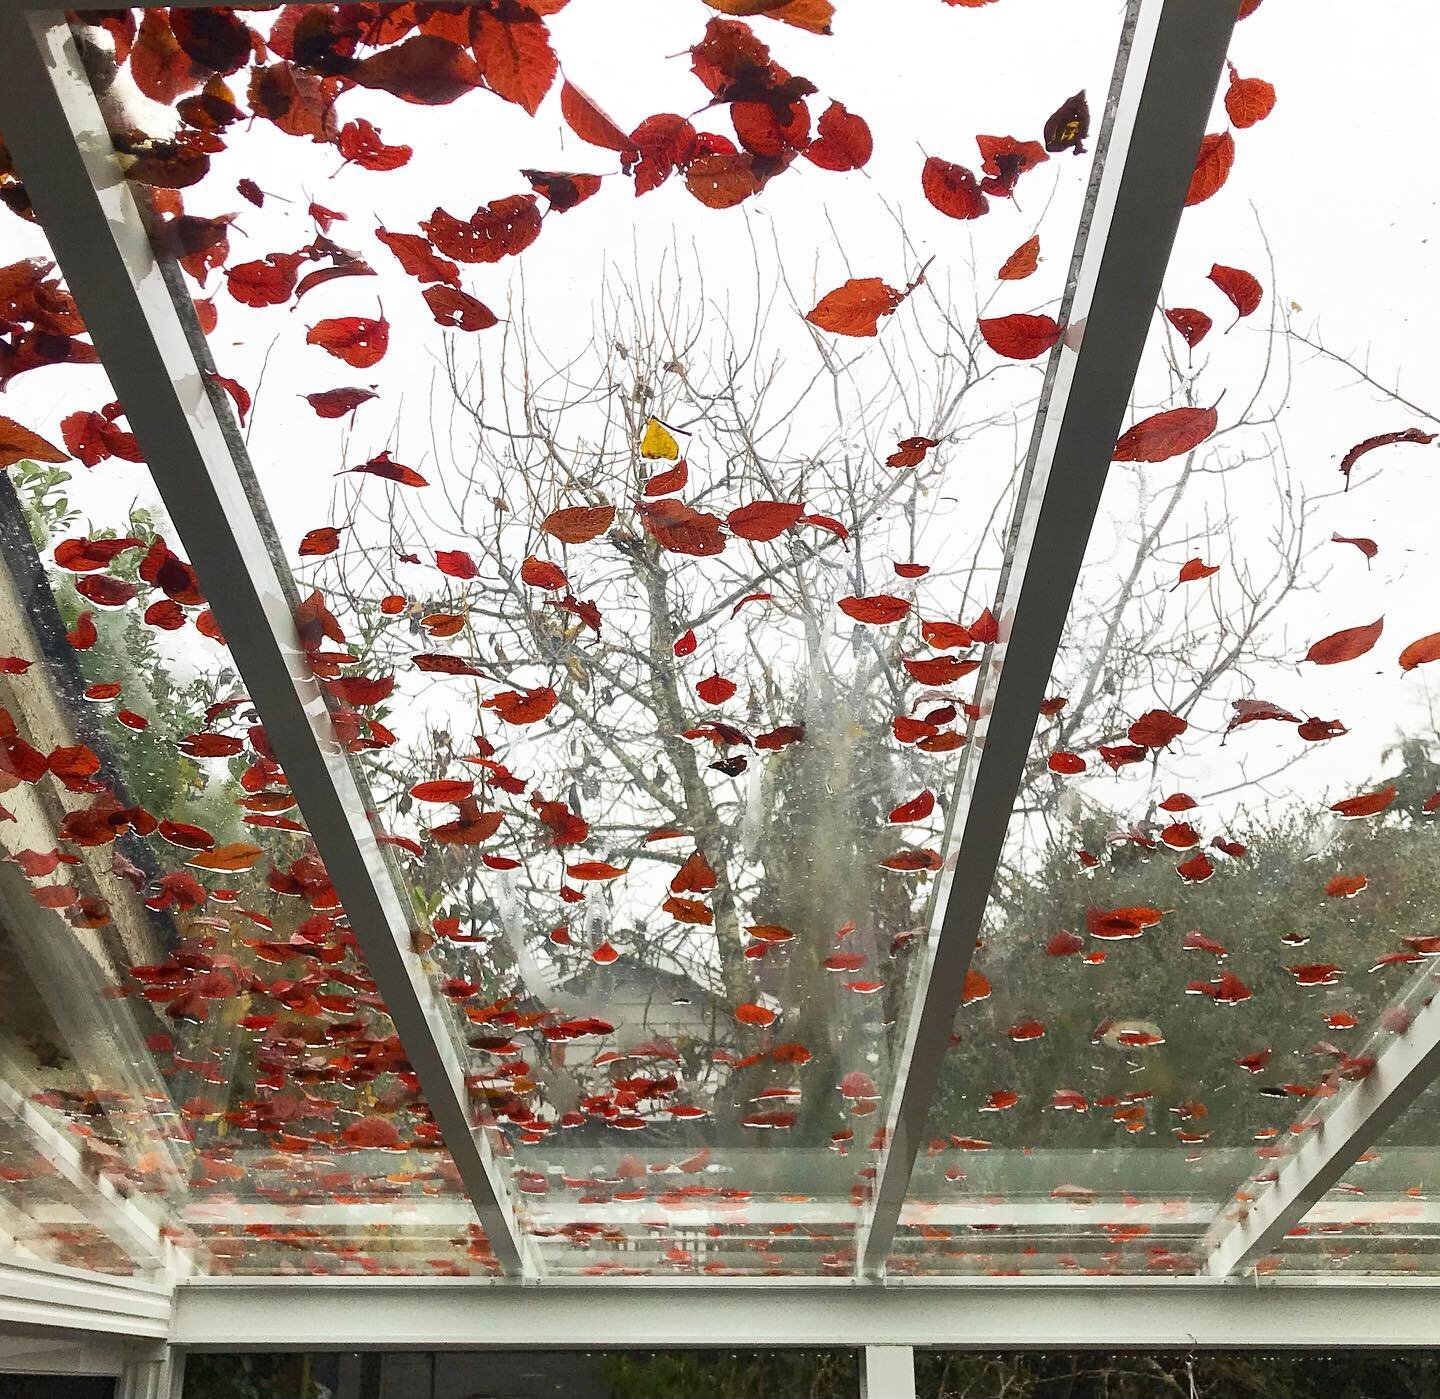 New background for the porch roof... different every week! #fallingleaves #autumn